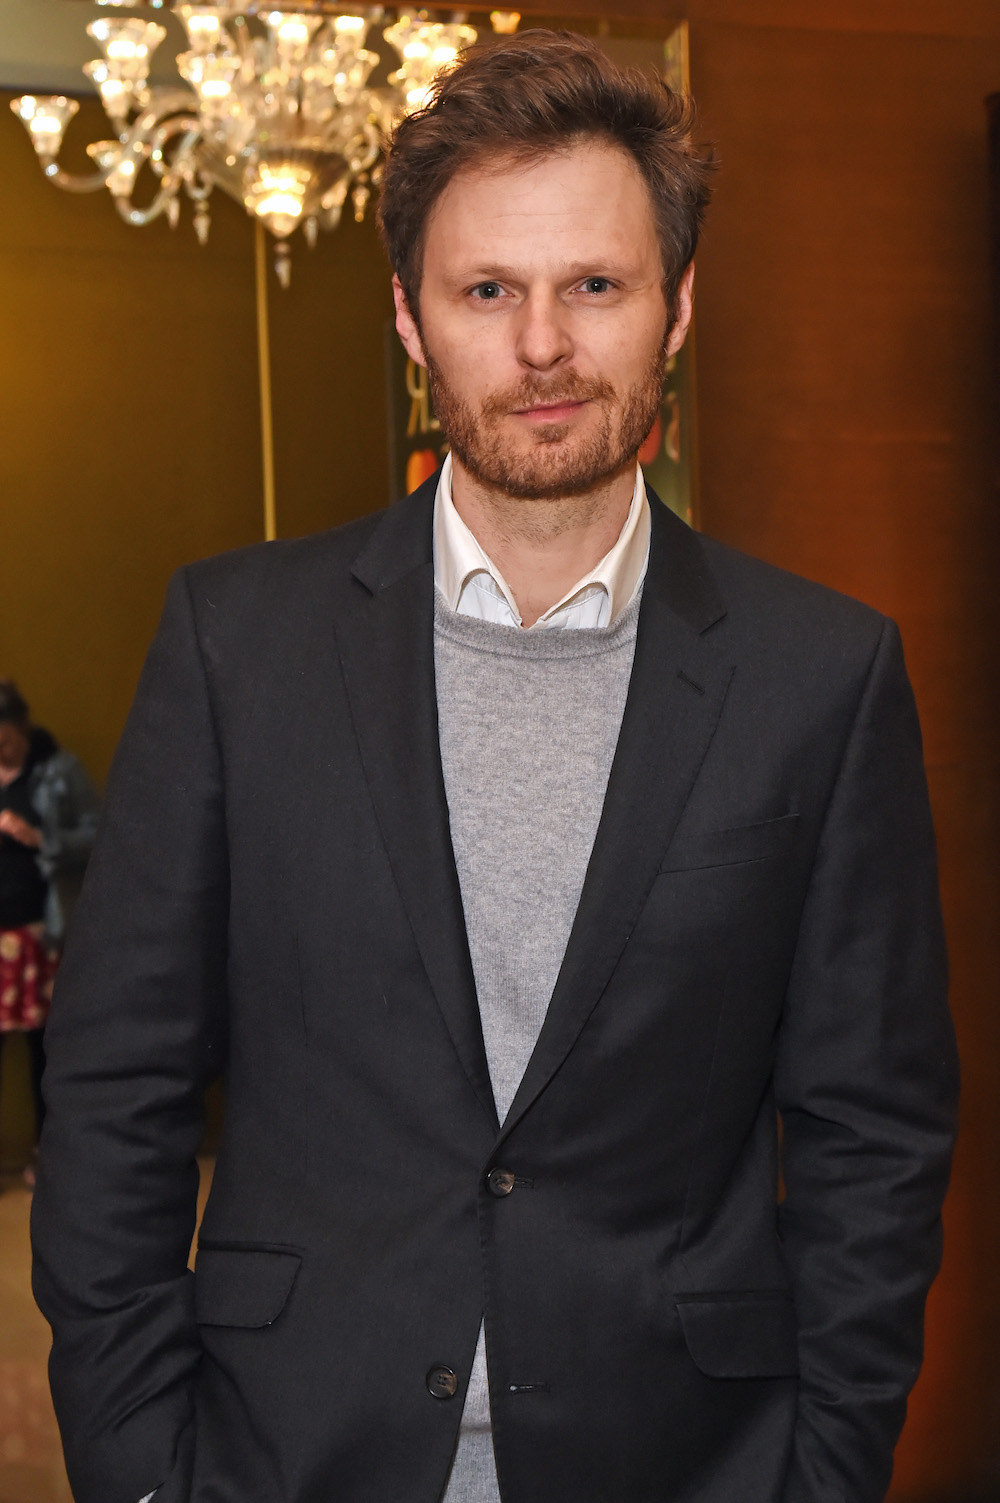 Rupert posing for a photo at an event